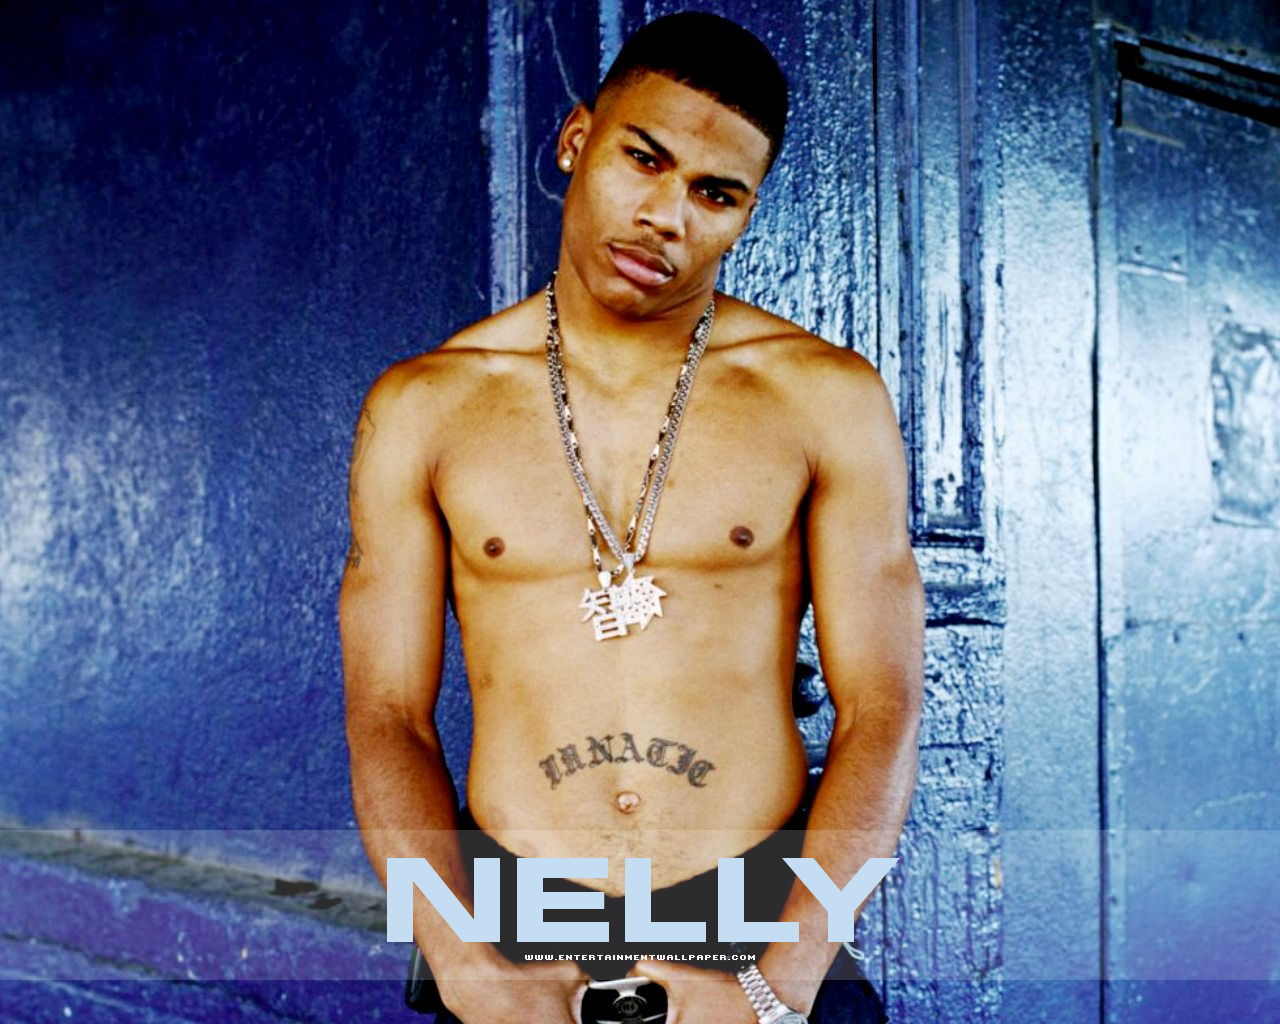 Nelly Wallpaper - Original size, download now.